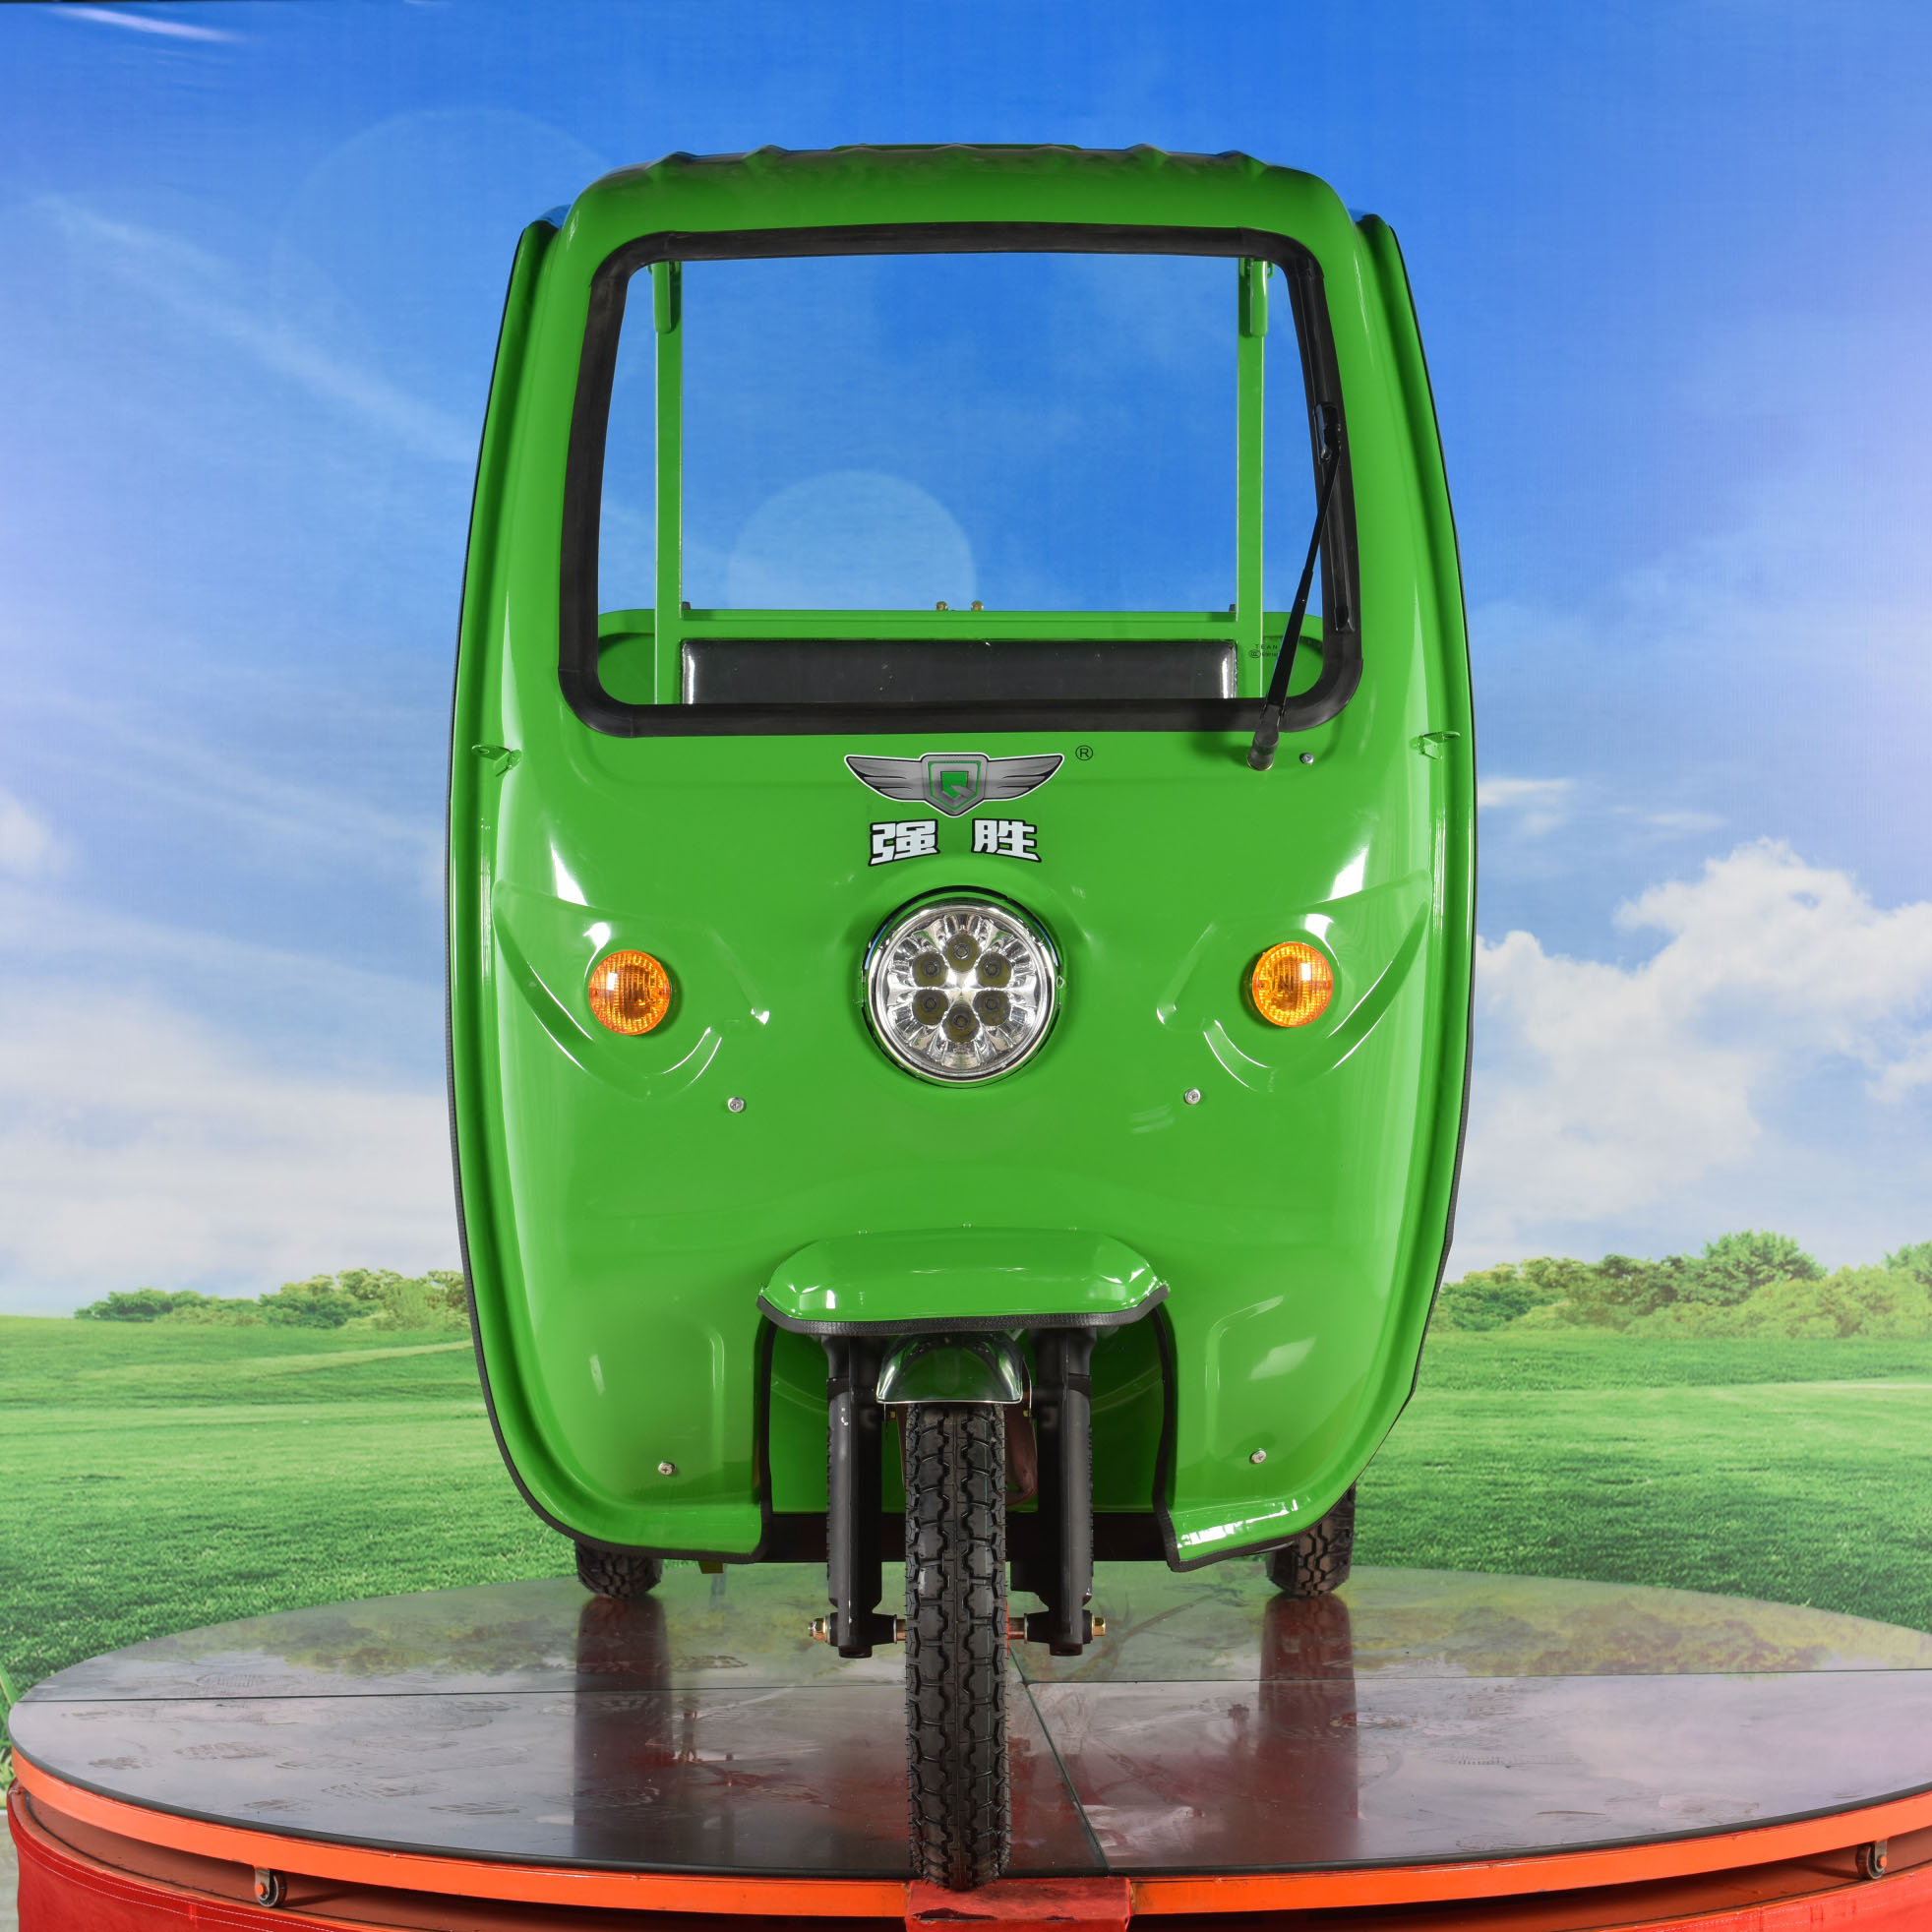 China Wholesale Eec Trike 3 Wheel Electric Tricycle 500w Manufacturers - Hot sale  Electric cargo for garbage cheaper  electric cart for cargo price  factory supply electric rickshaw for grabage &...